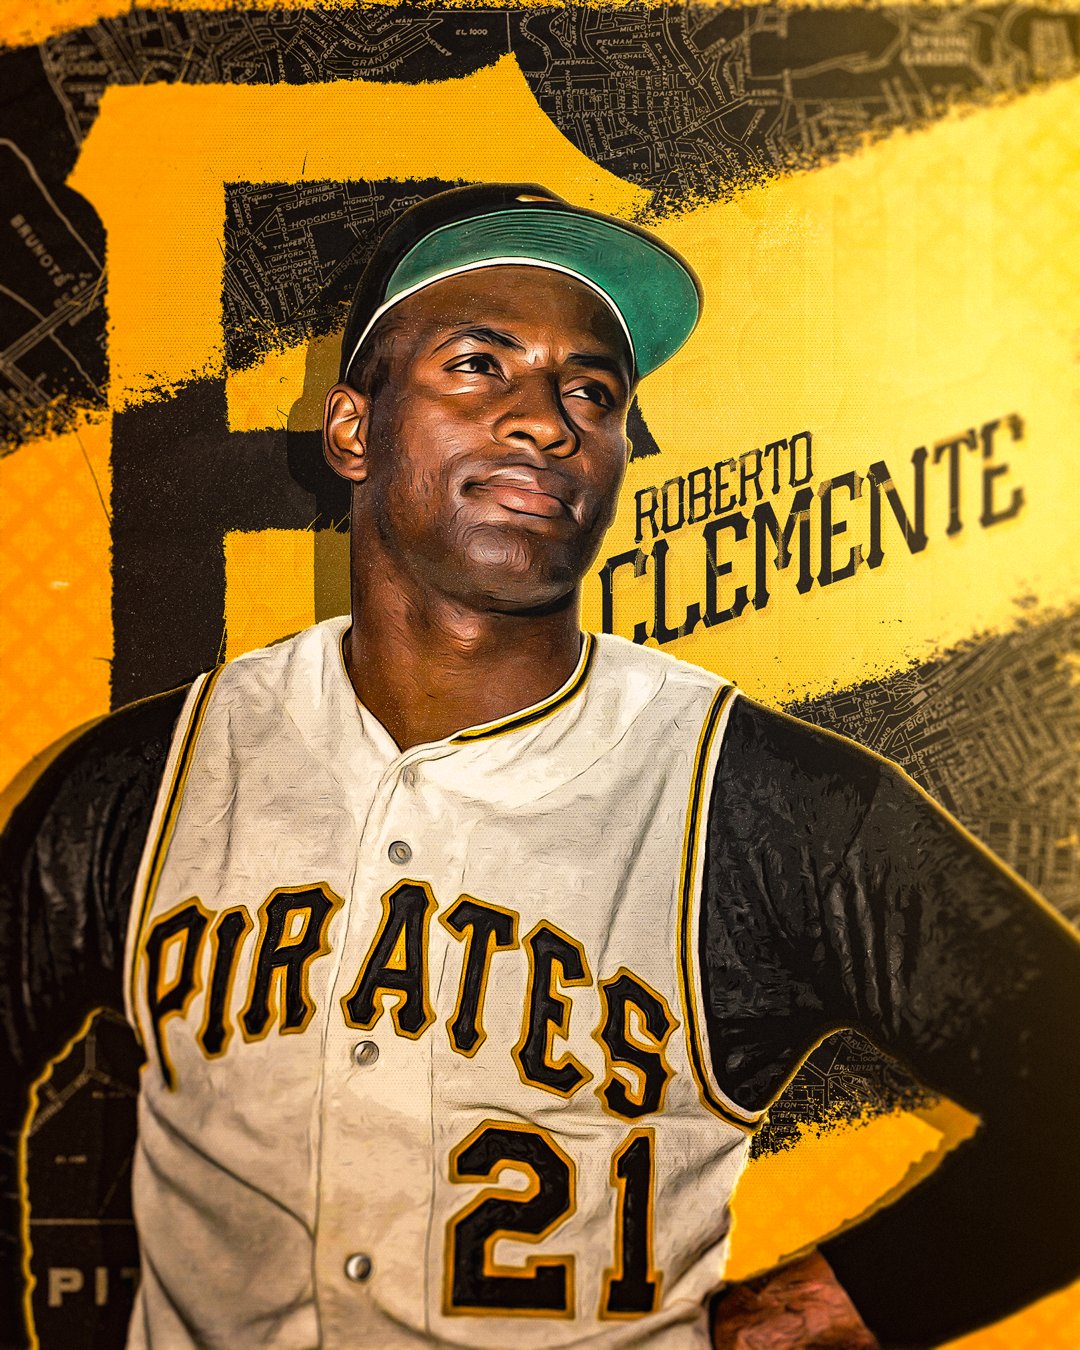 MLB on X: Today, we remember Roberto Clemente, a great baseball